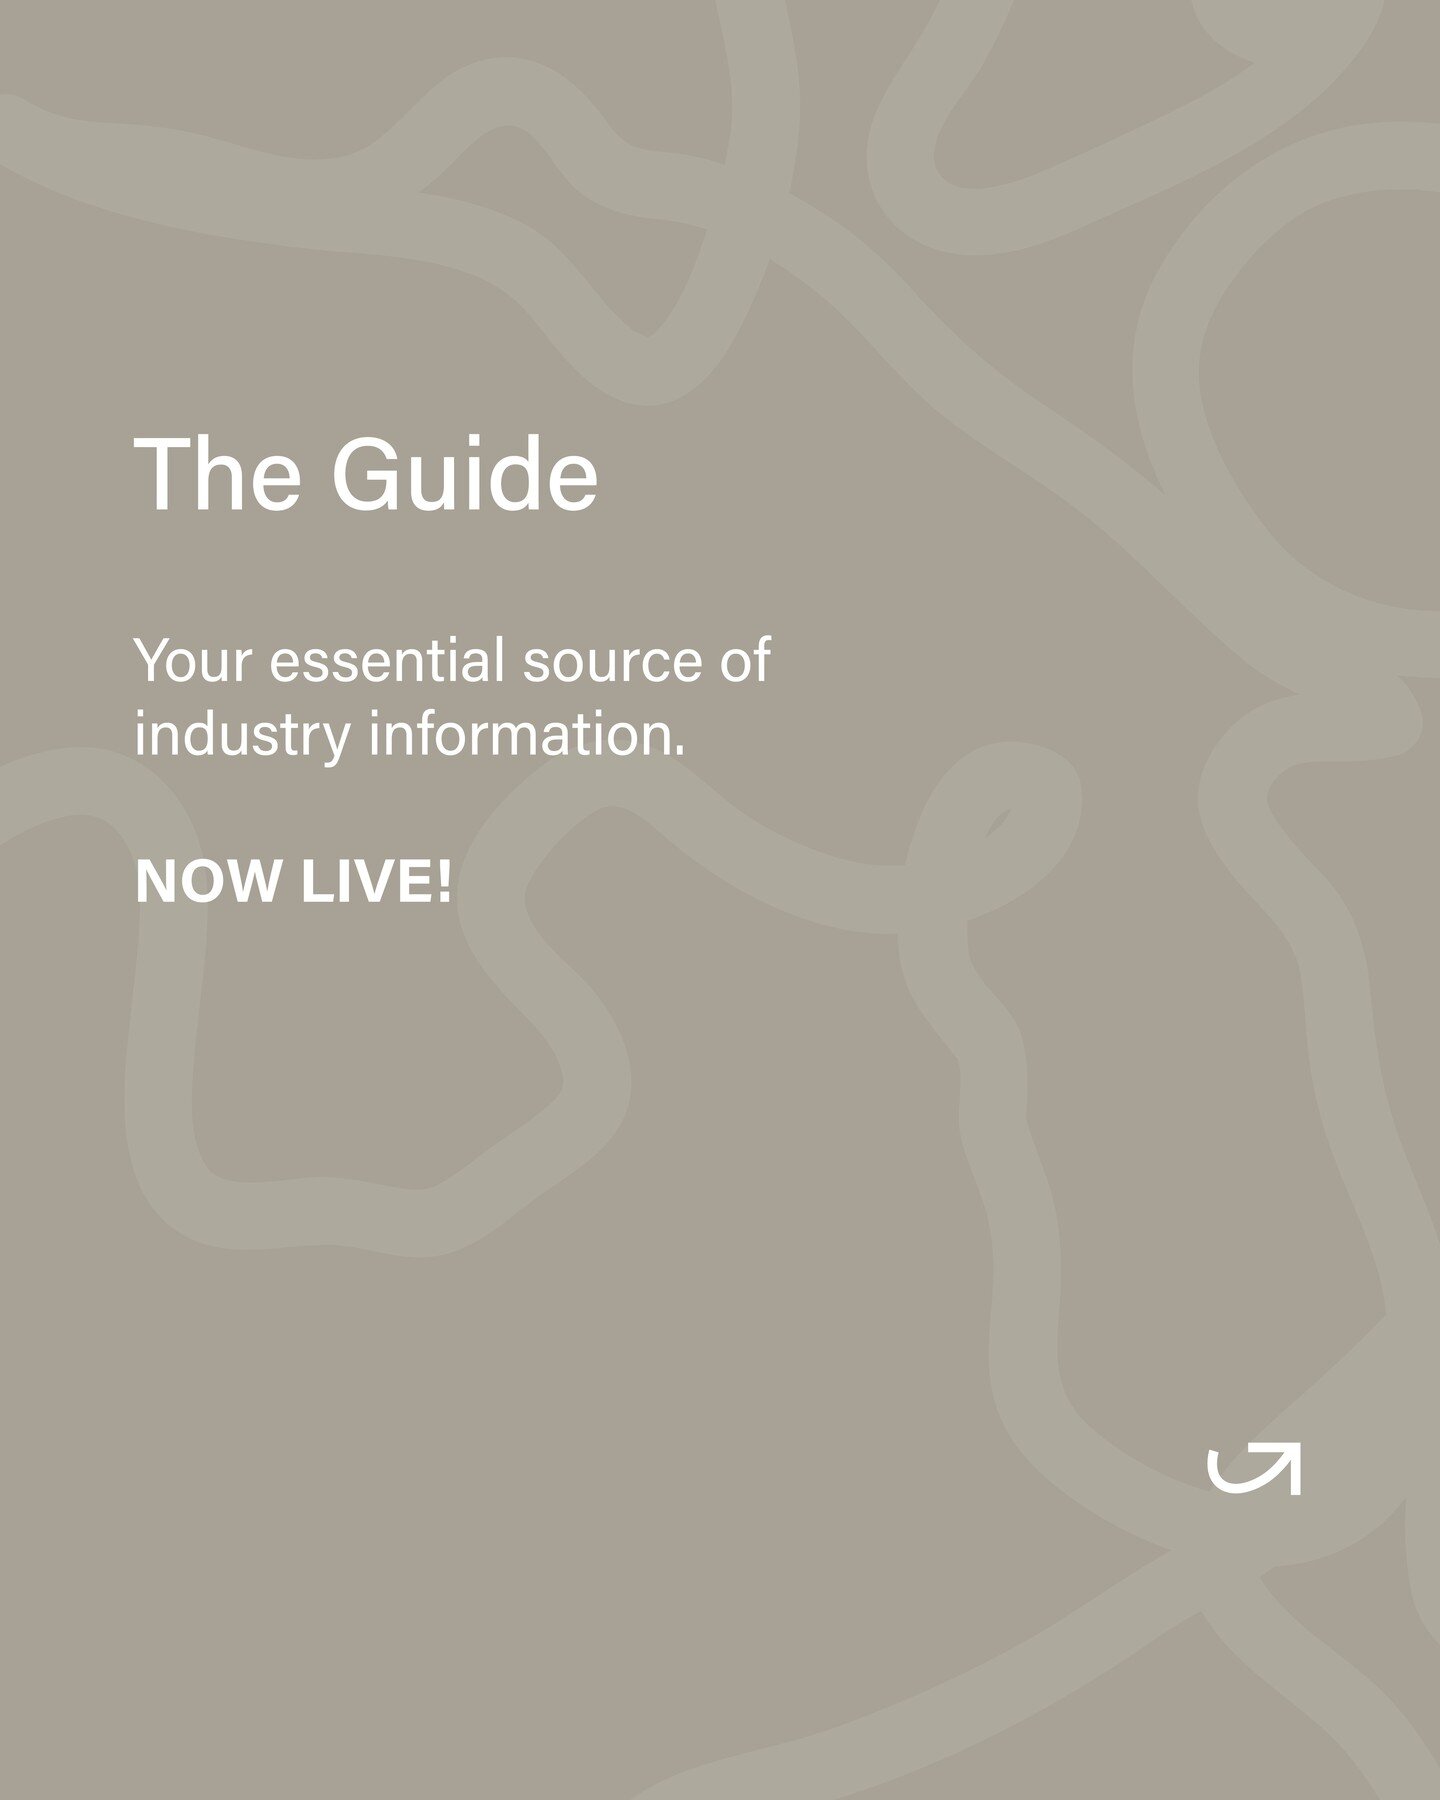 Time to check your inboxes, The Guide is now live! 🚨

The Guide is your essential source for information on opportunities, grants, events, and professional development programs for creatives.

We curate the most exciting and relevant listings tailor